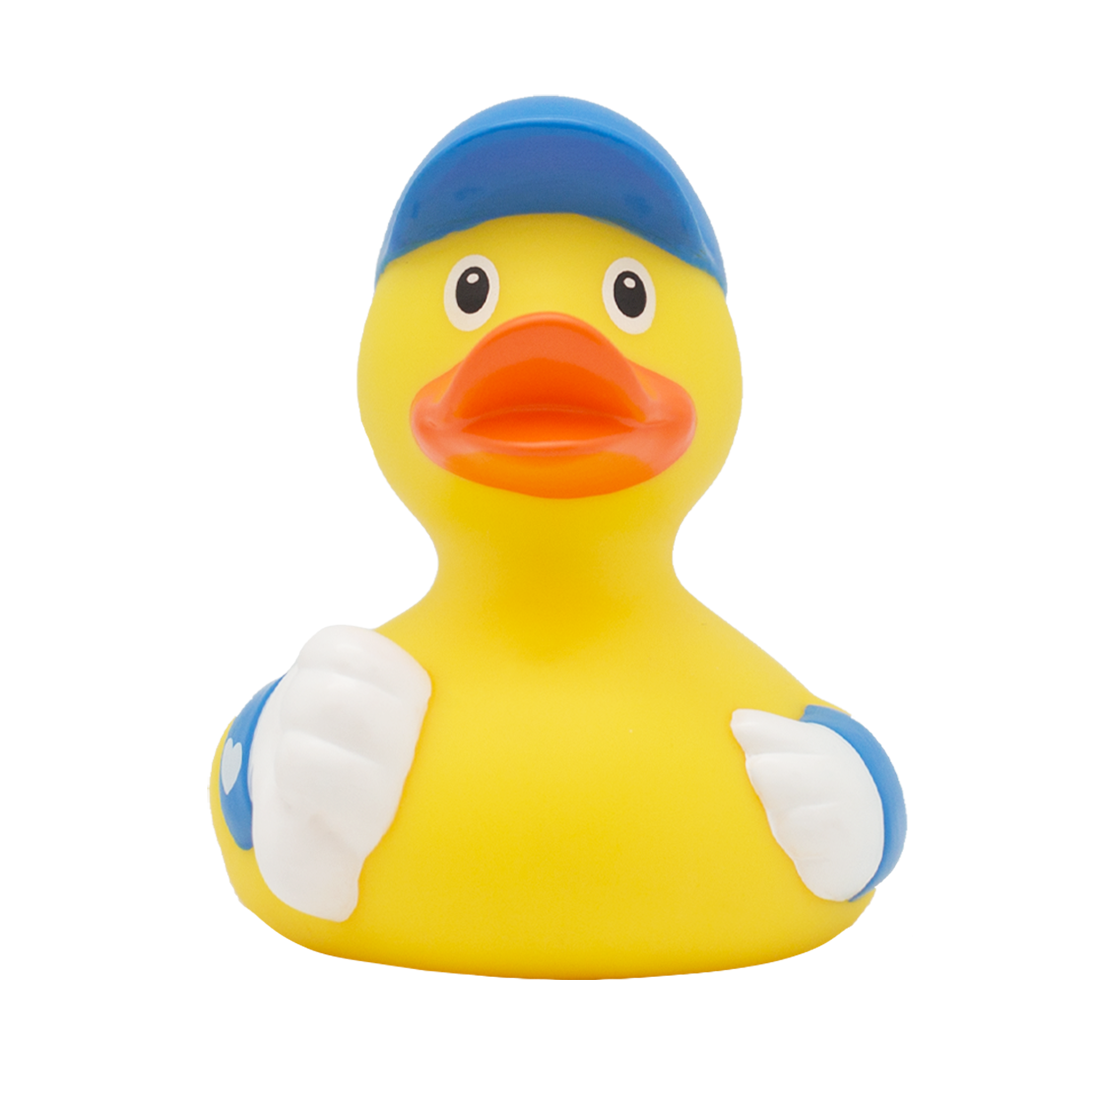 Car Driver Rubber Duck Bath Toy by LiLaLu